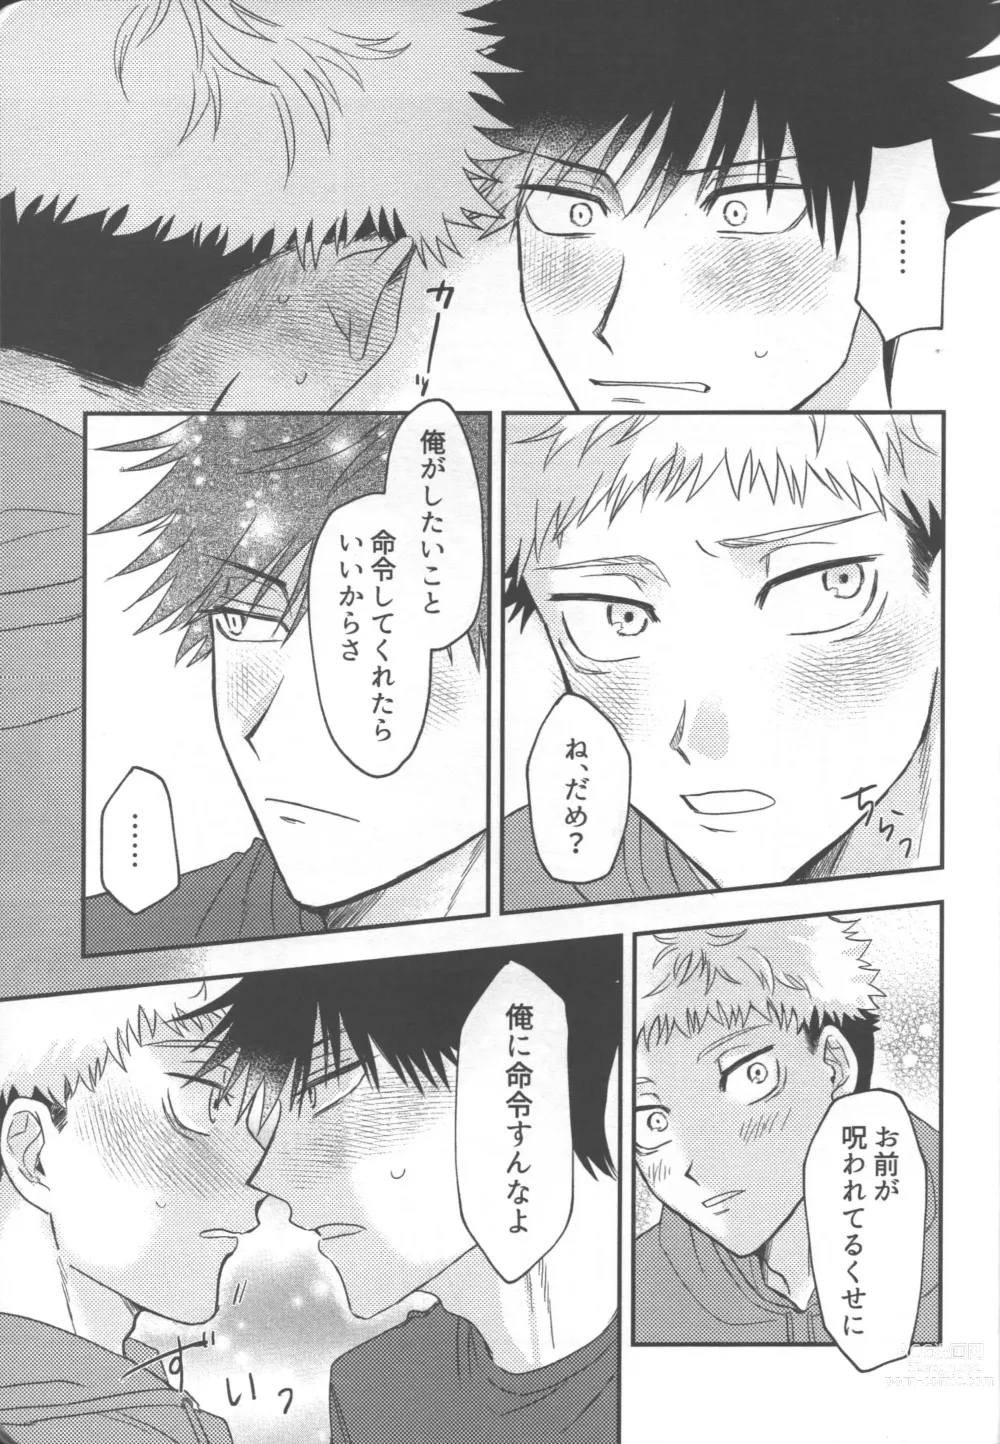 Page 14 of doujinshi Dont Look at ME Like That.